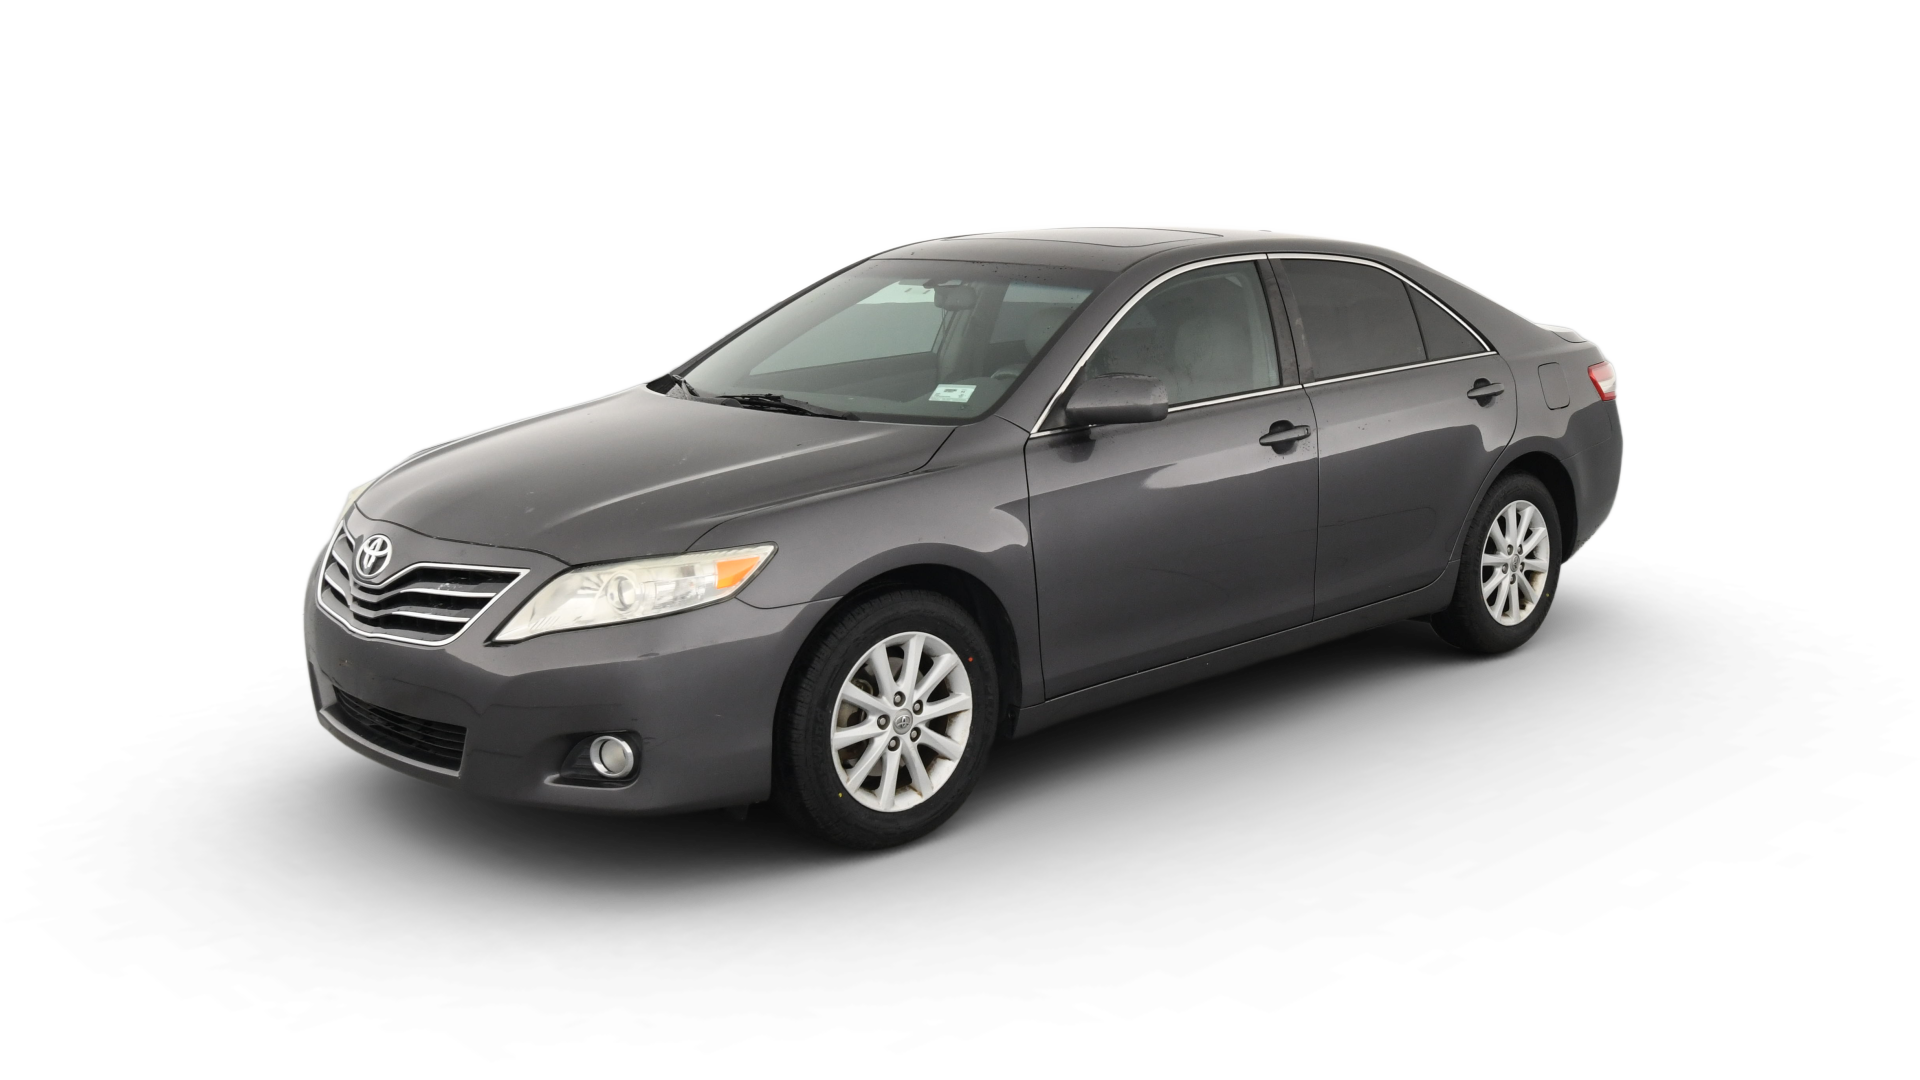 Used Toyota Camry For Sale Online | Carvana